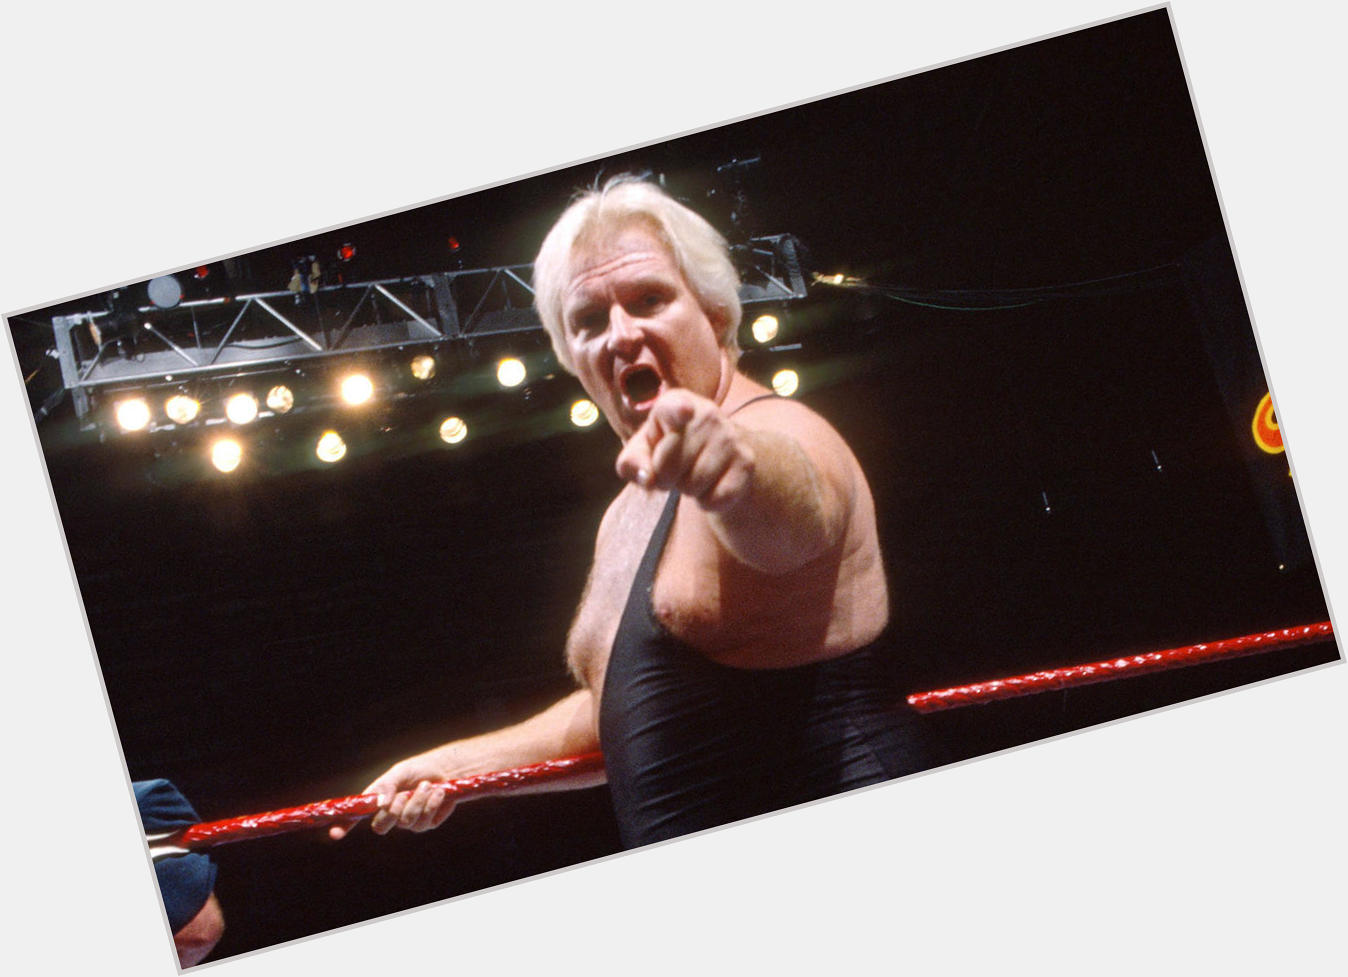 <a href="/hot-men/bobby-heenan/is-he-still-alive-dying-or-where-now">Bobby Heenan</a>  